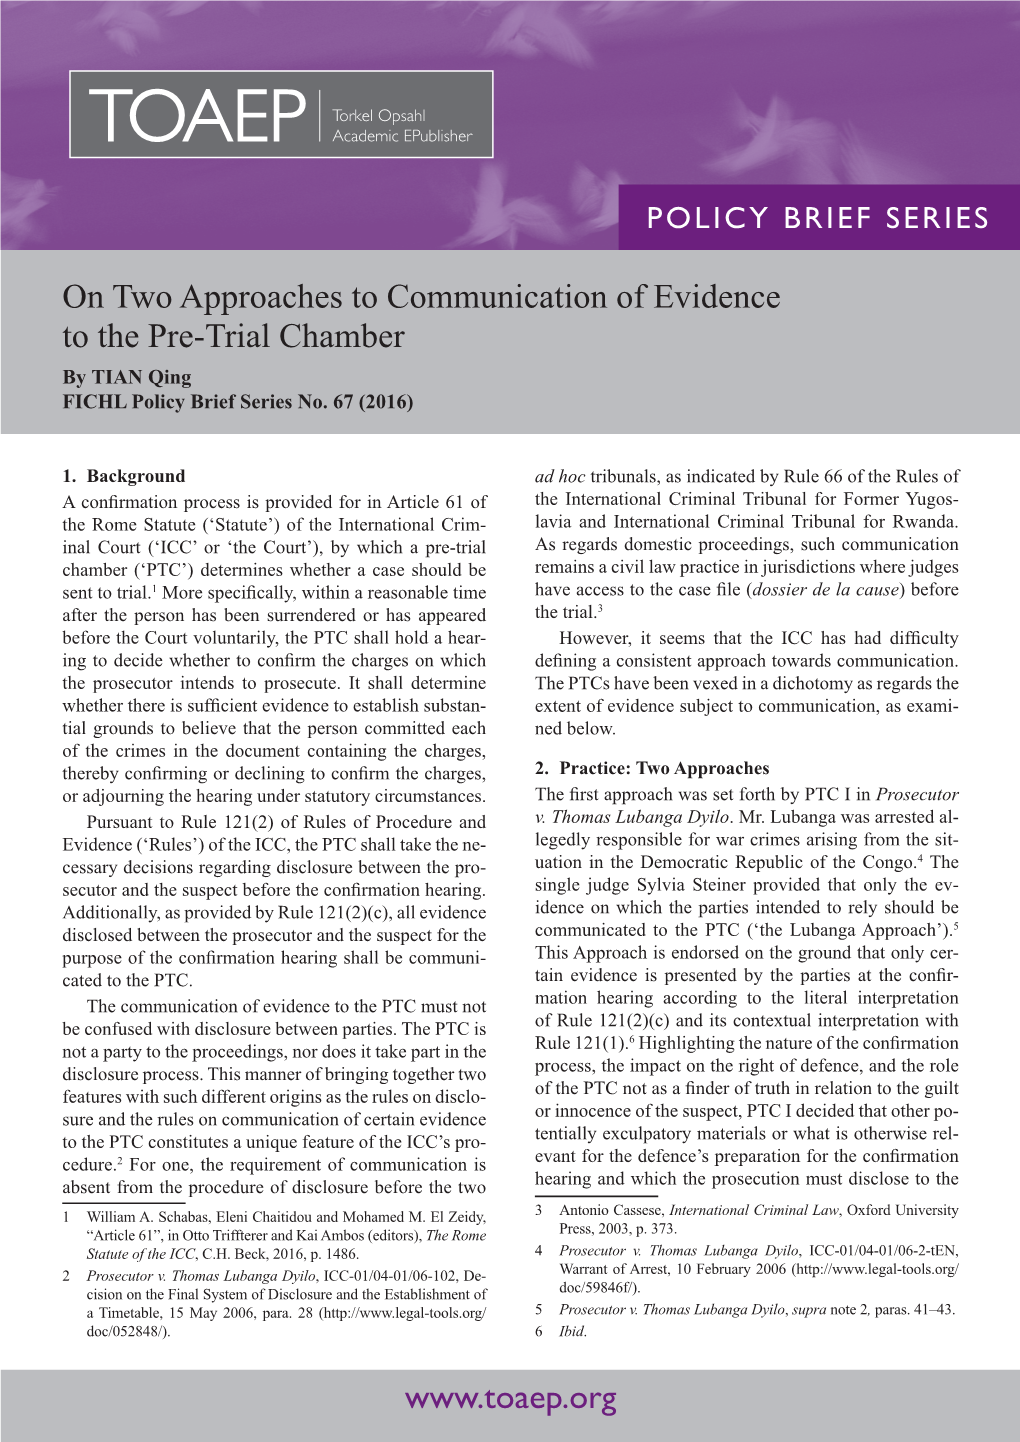 On Two Approaches to Communication of Evidence to the Pre-Trial Chamber by TIAN Qing FICHL Policy Brief Series No